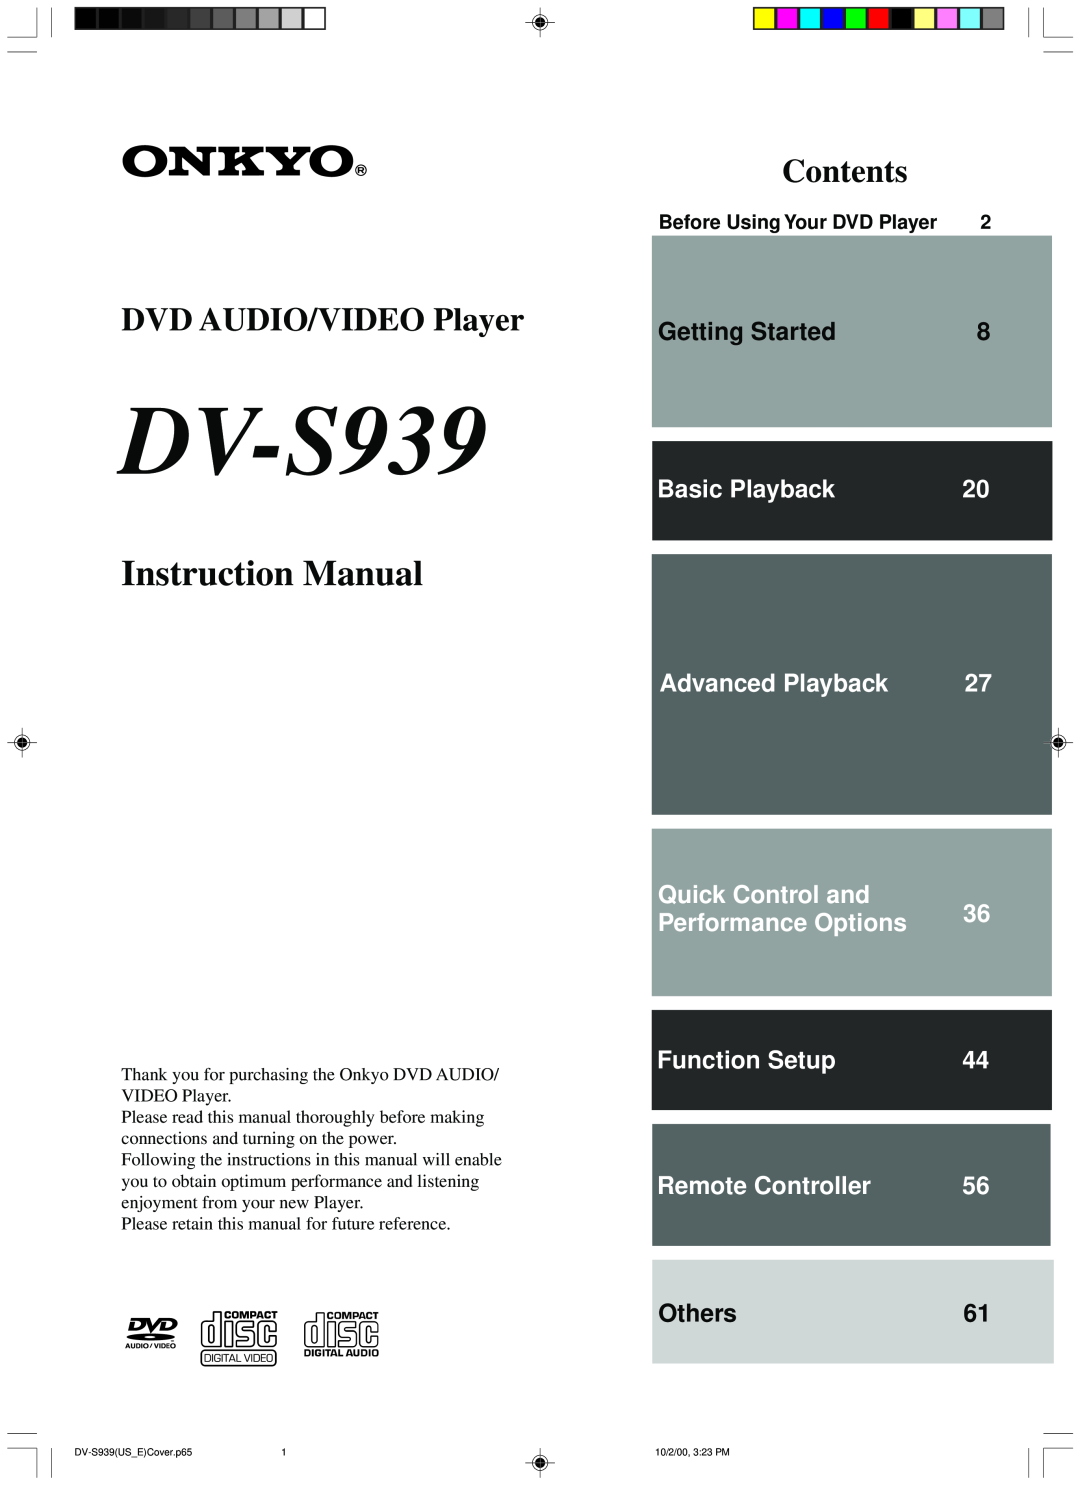 Onkyo DV-S939 instruction manual Getting Started, Others61, Before Using Your DVD Player, Instruction Manual, Contents 